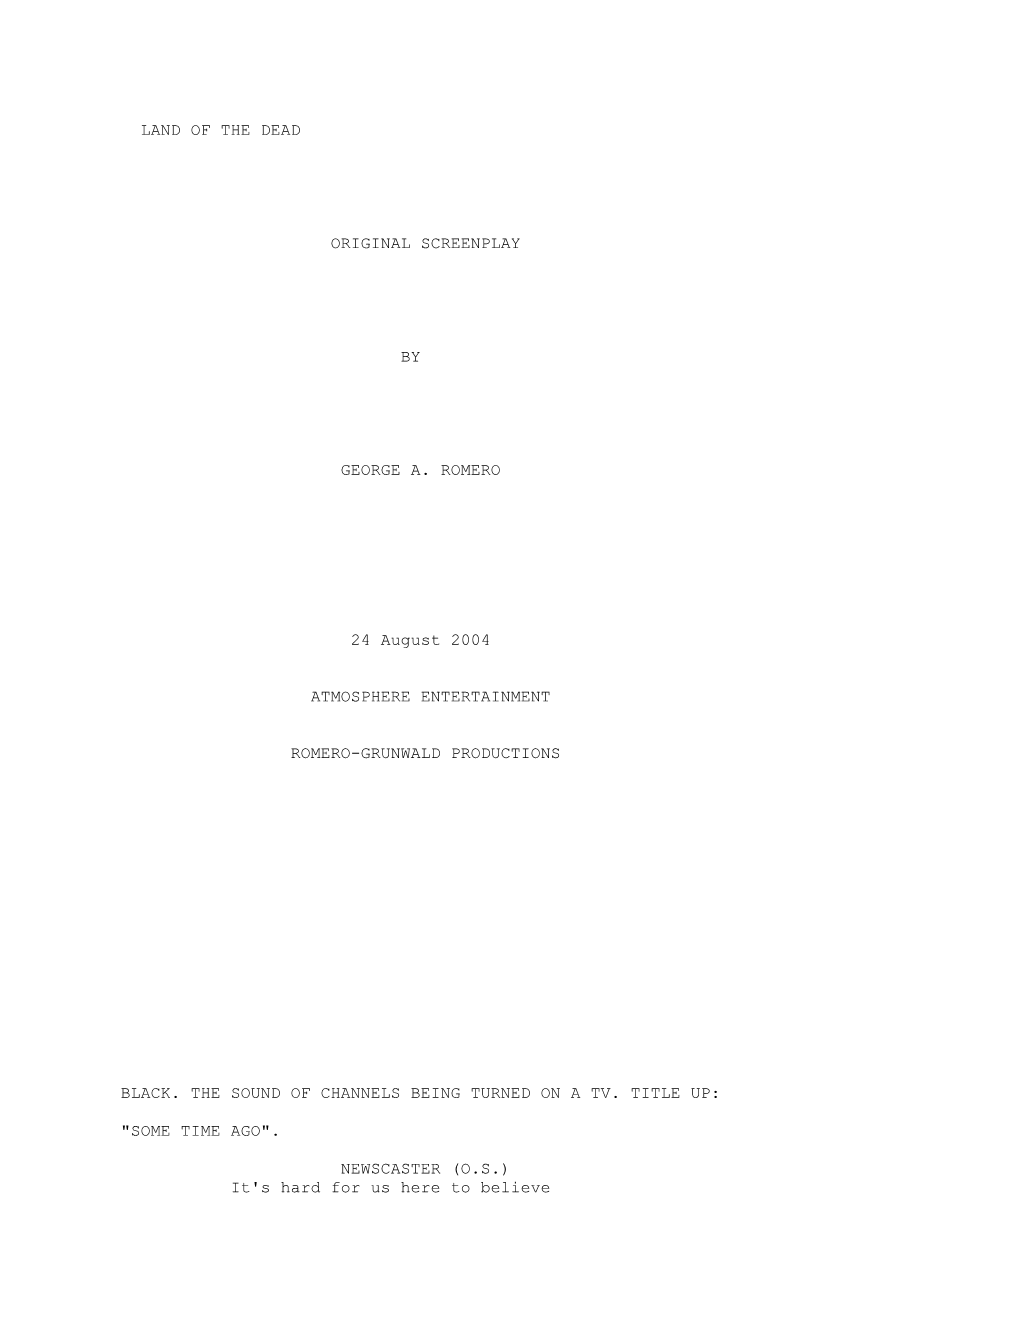 Land of the Dead Original Screenplay by George A